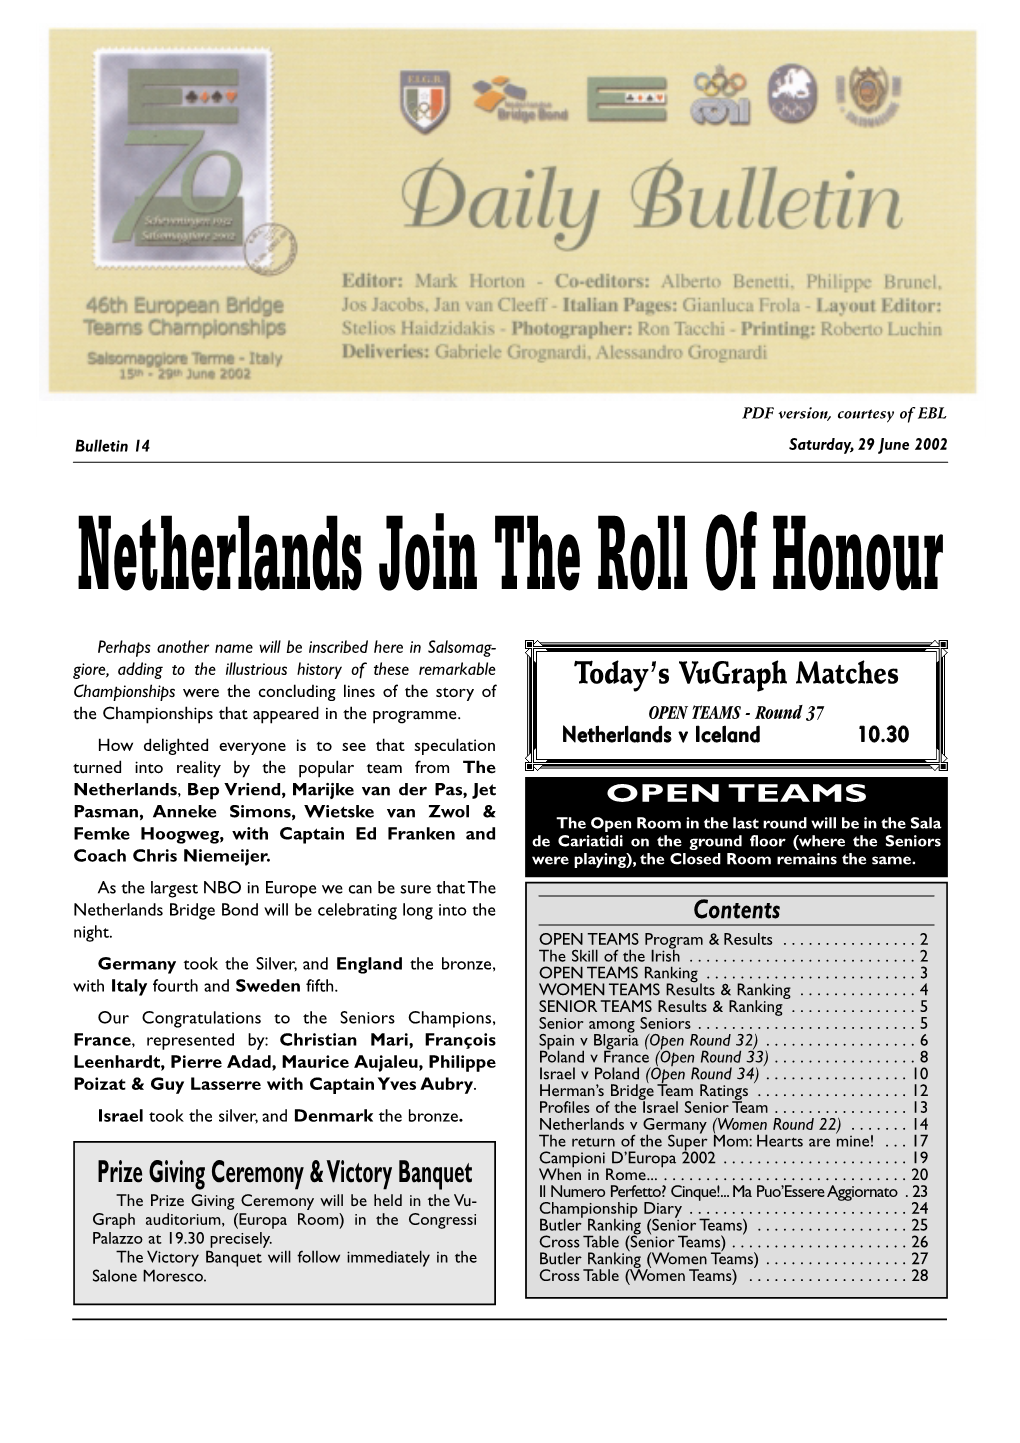 Netherlands Join the Roll of Honour